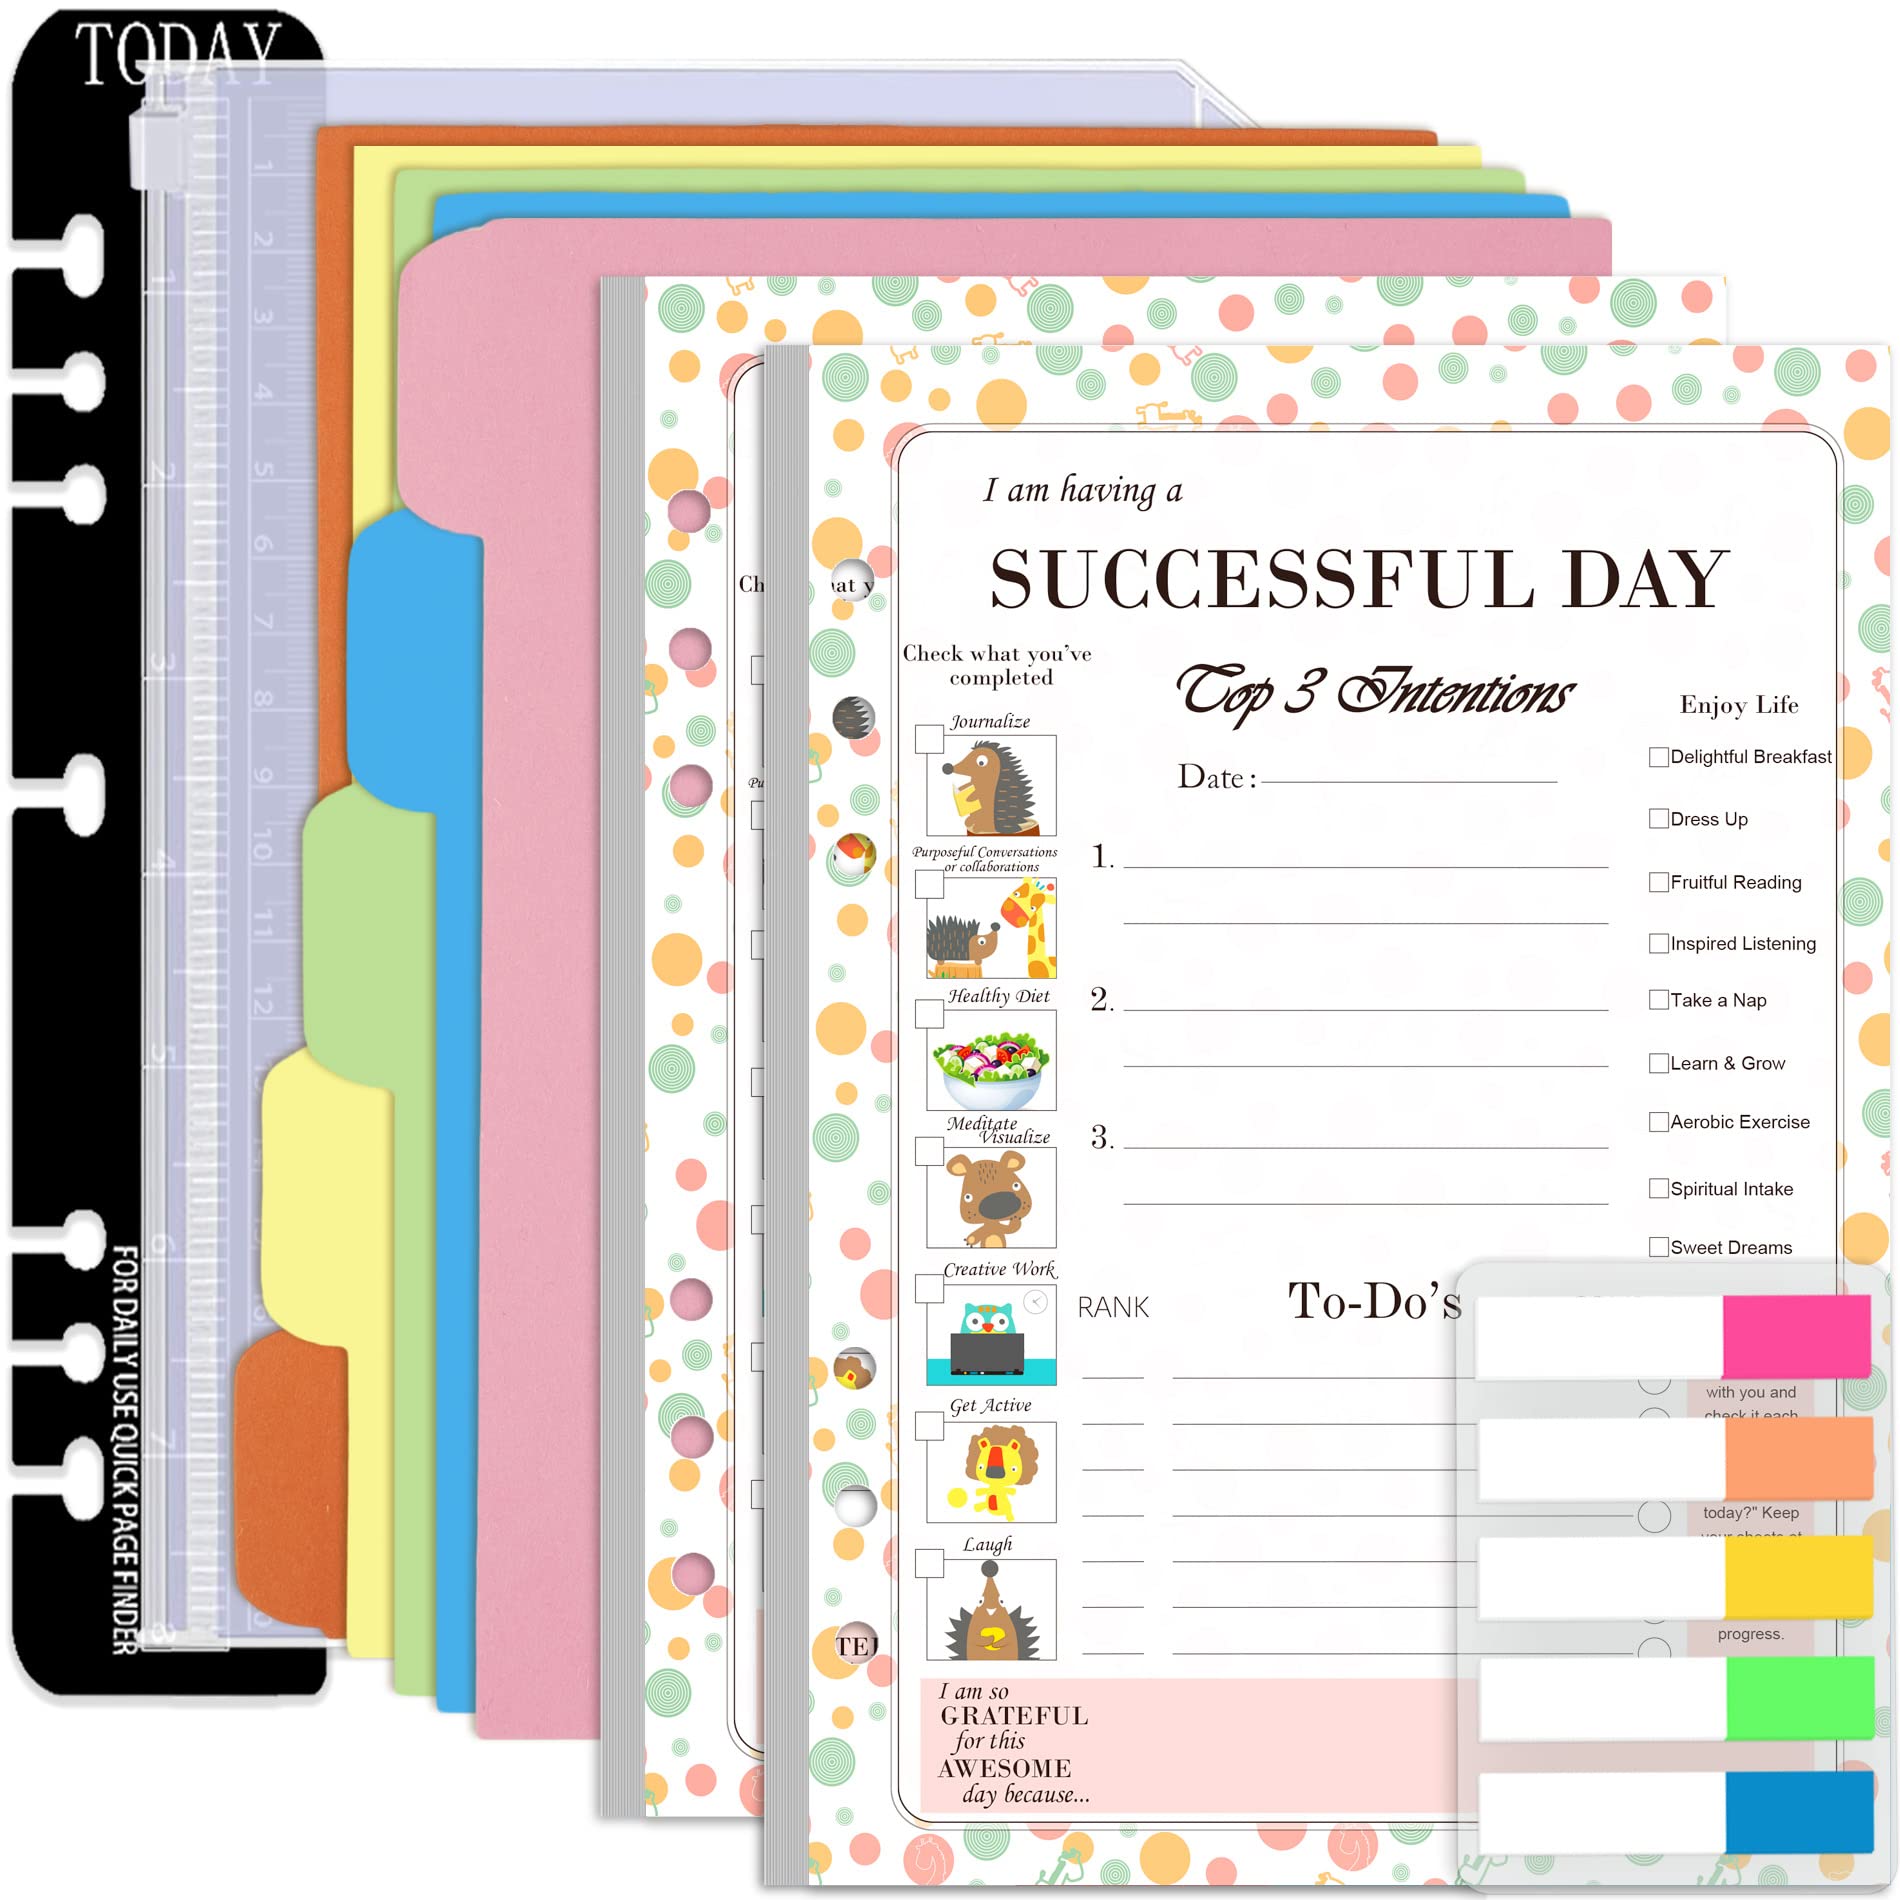 Rancco A5 Planner Inserts Daily Planner To Do List Refills, 90 Sheet 180 Page 6-Hole Successful Day Planner Refills w/Binder Divider, Pouch, Ruler, Index Tab for Filofax, Journal, Undated,5.7x8.3inch